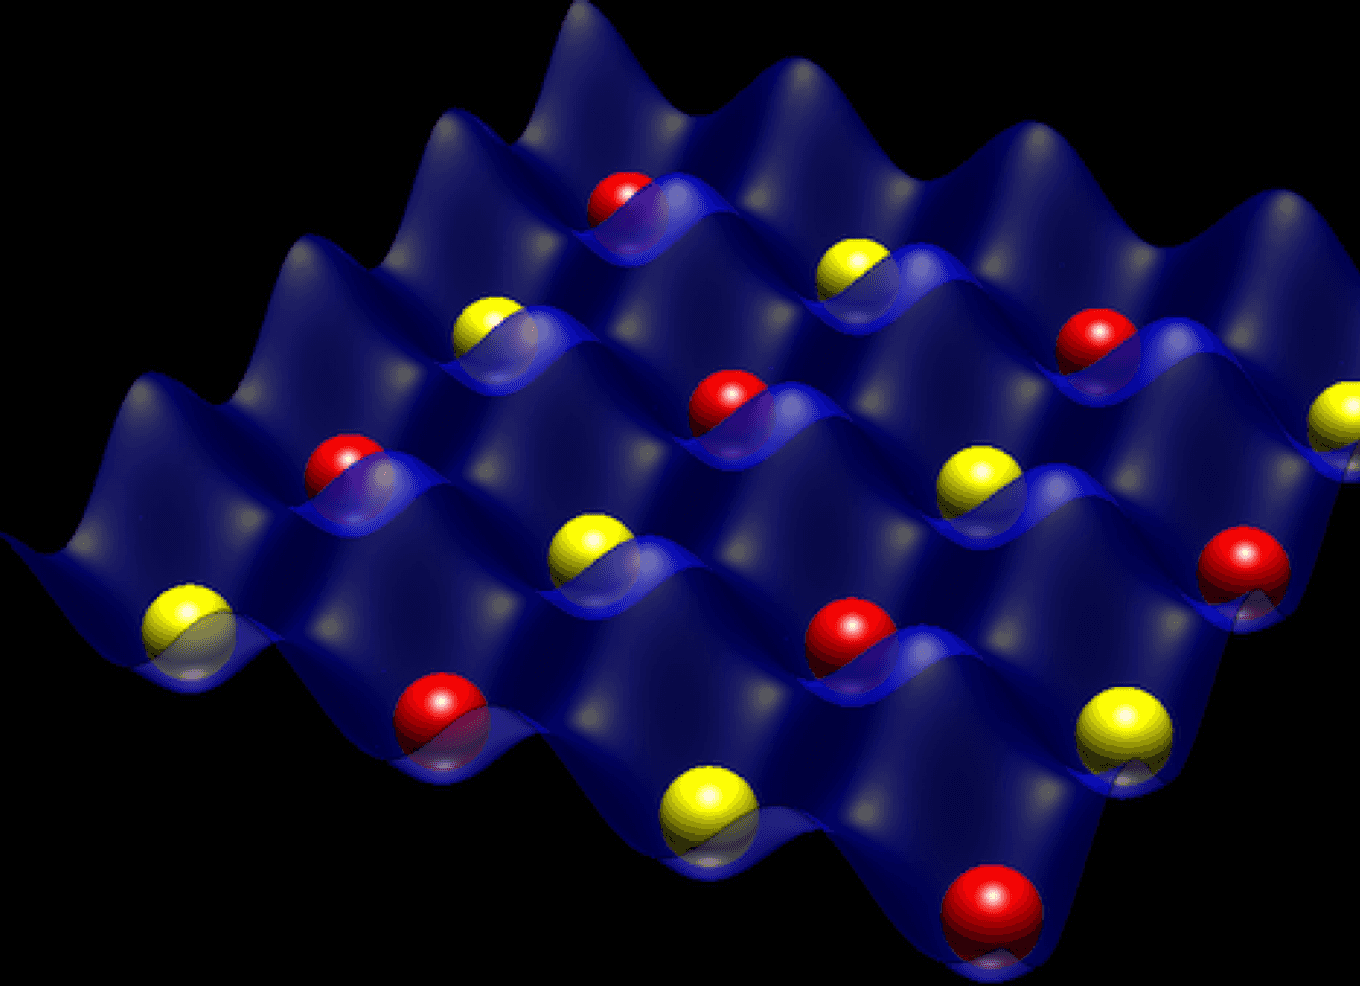 rendered image of a lattice of neutral atoms